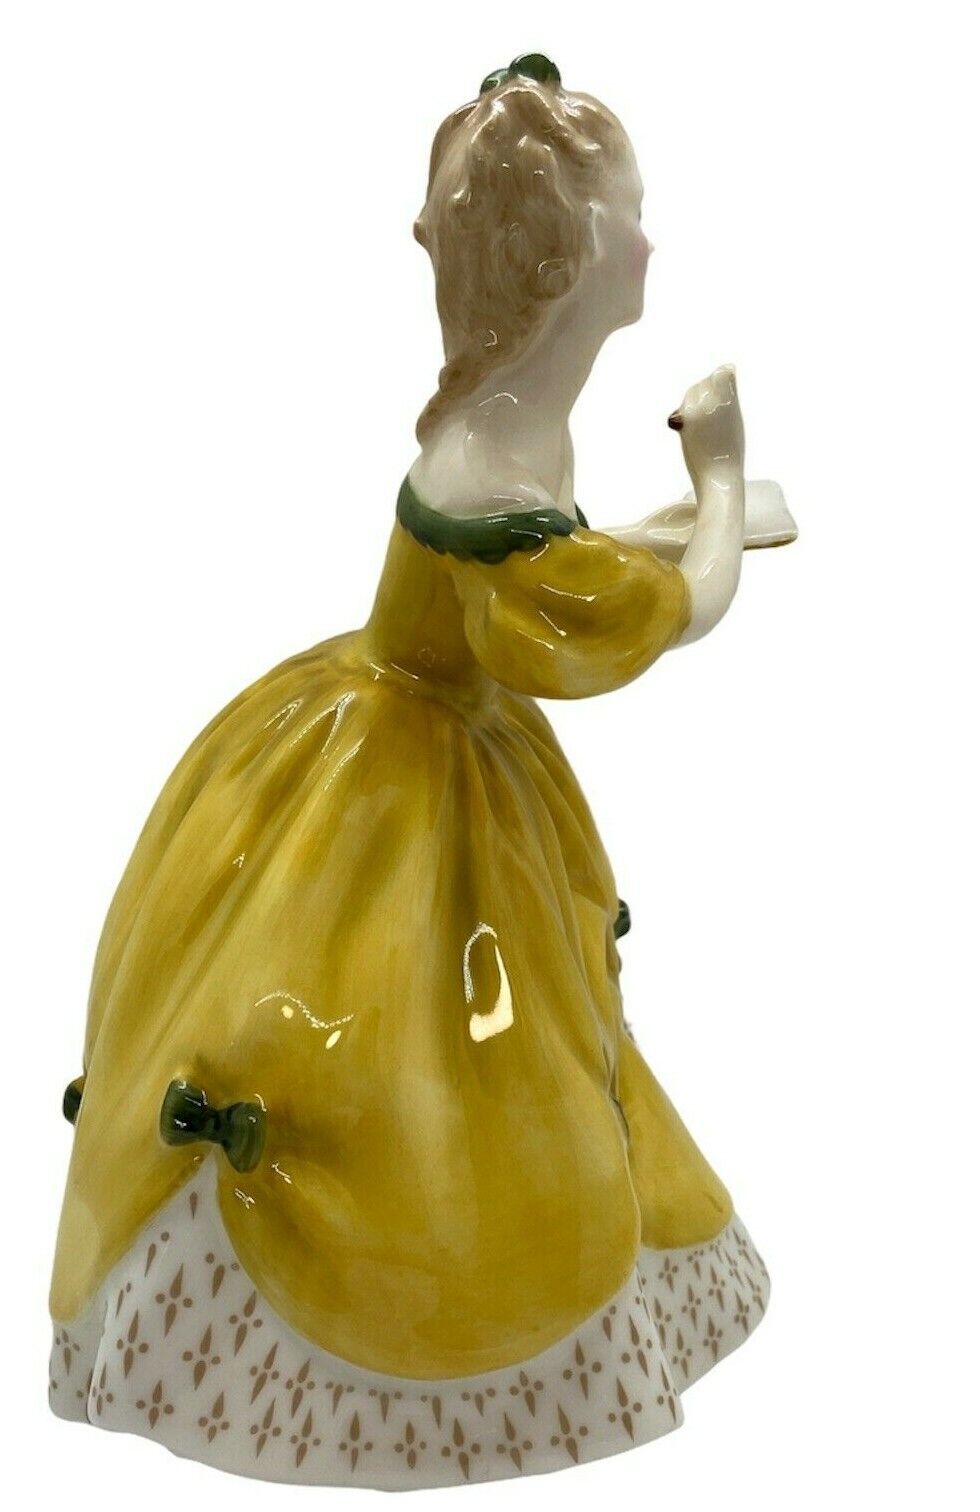 Royal Doulton Figurine The Last Waltz 1965 Lady In Yellow Dress